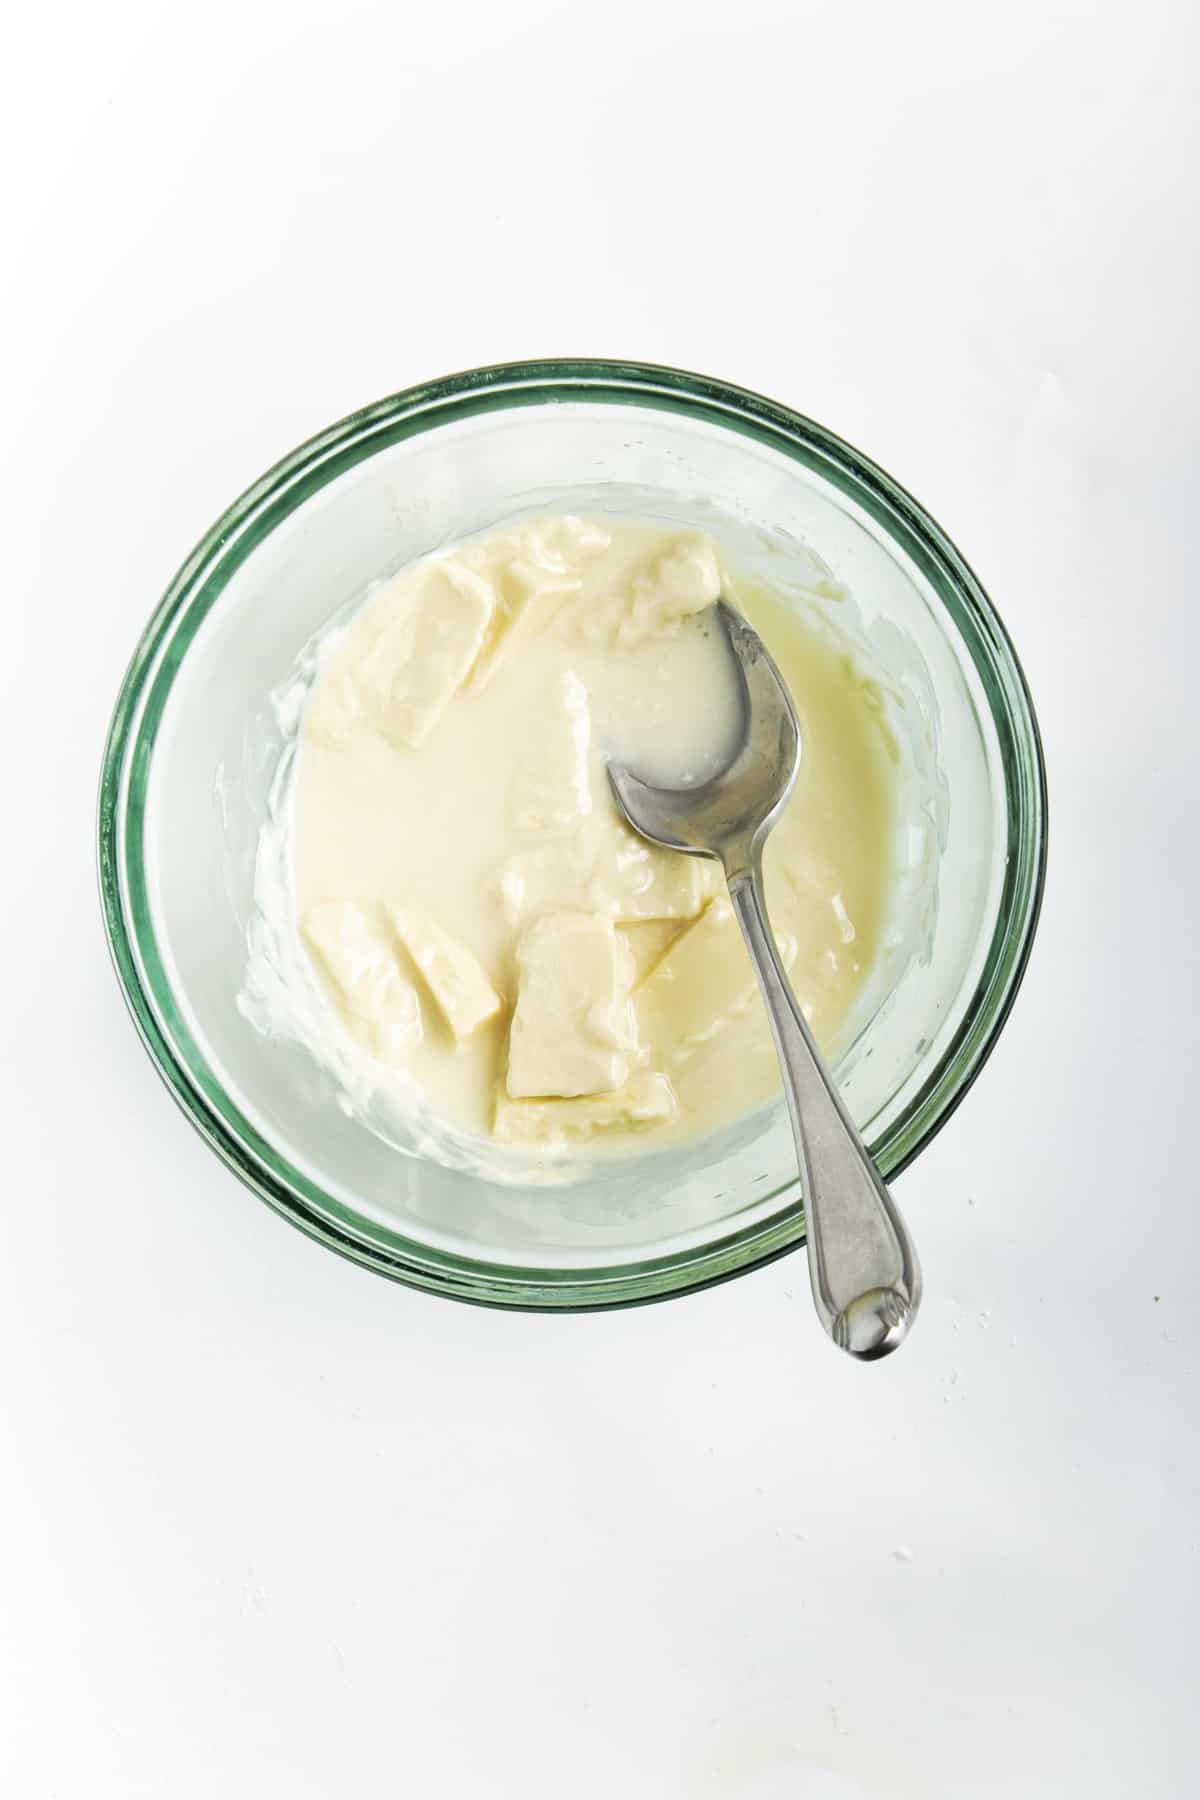 Melted white chocolate.